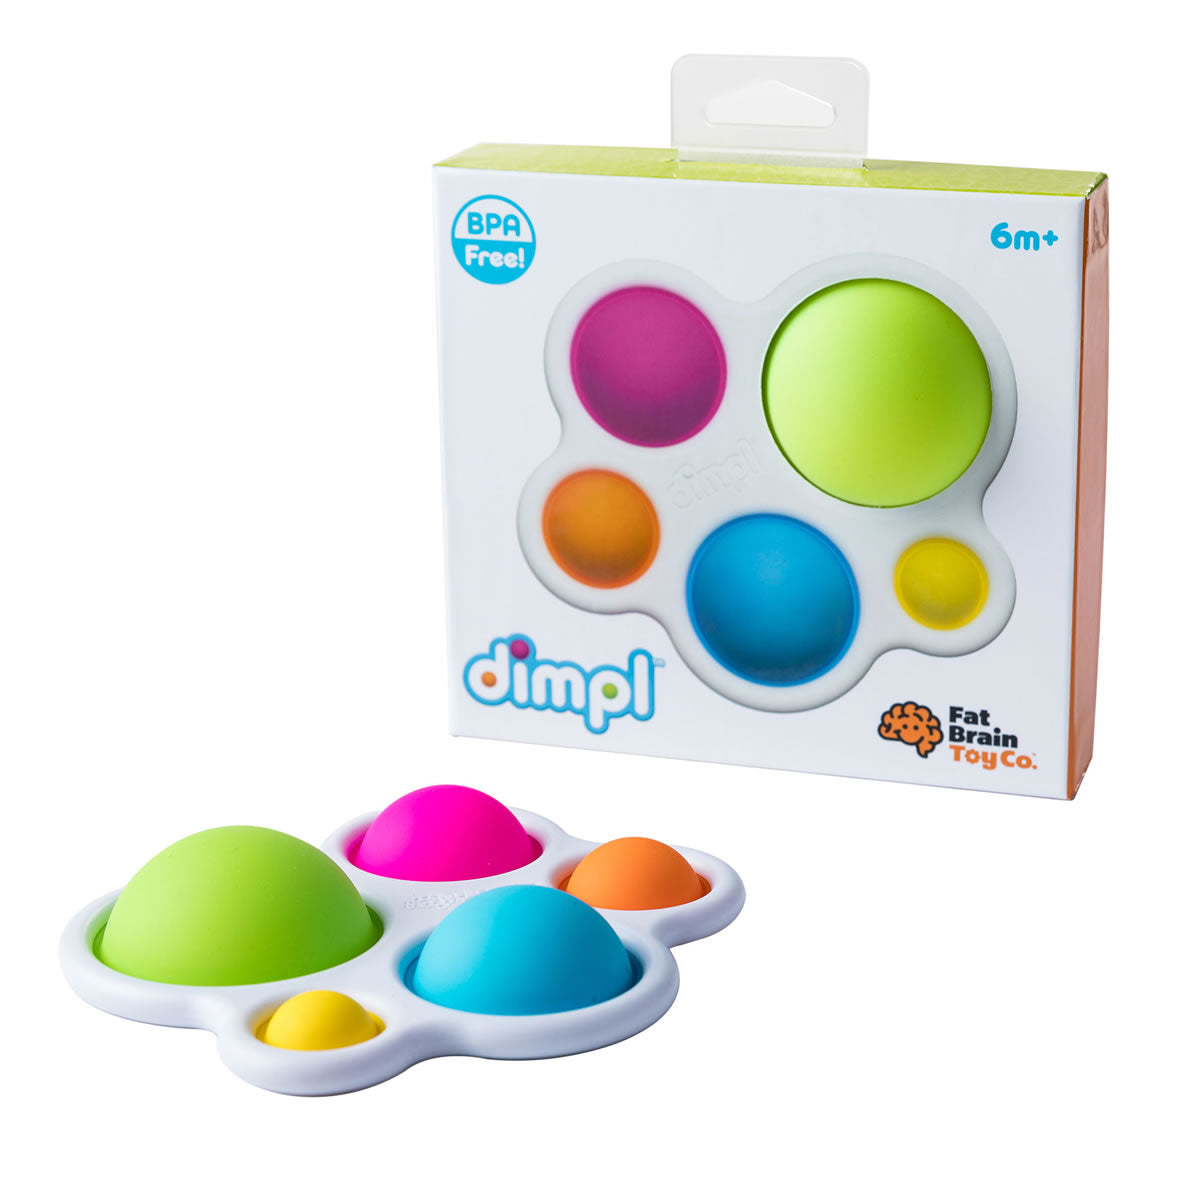 Dimpl - Fidget and Teething Toy